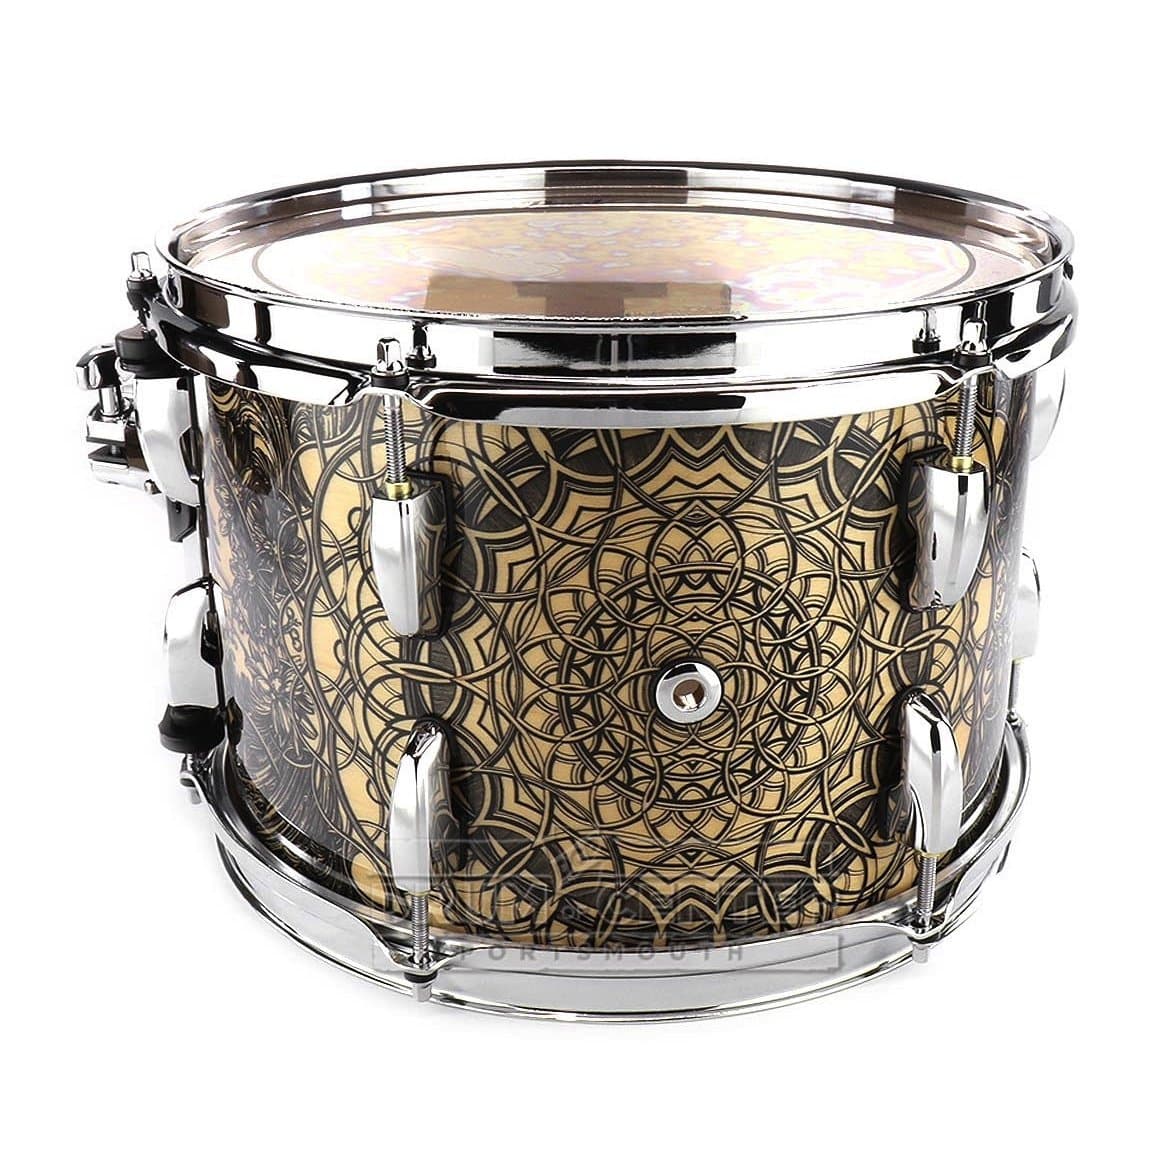 Pearl Masters Maple Complete 13x9 Tom - Cain & Abel